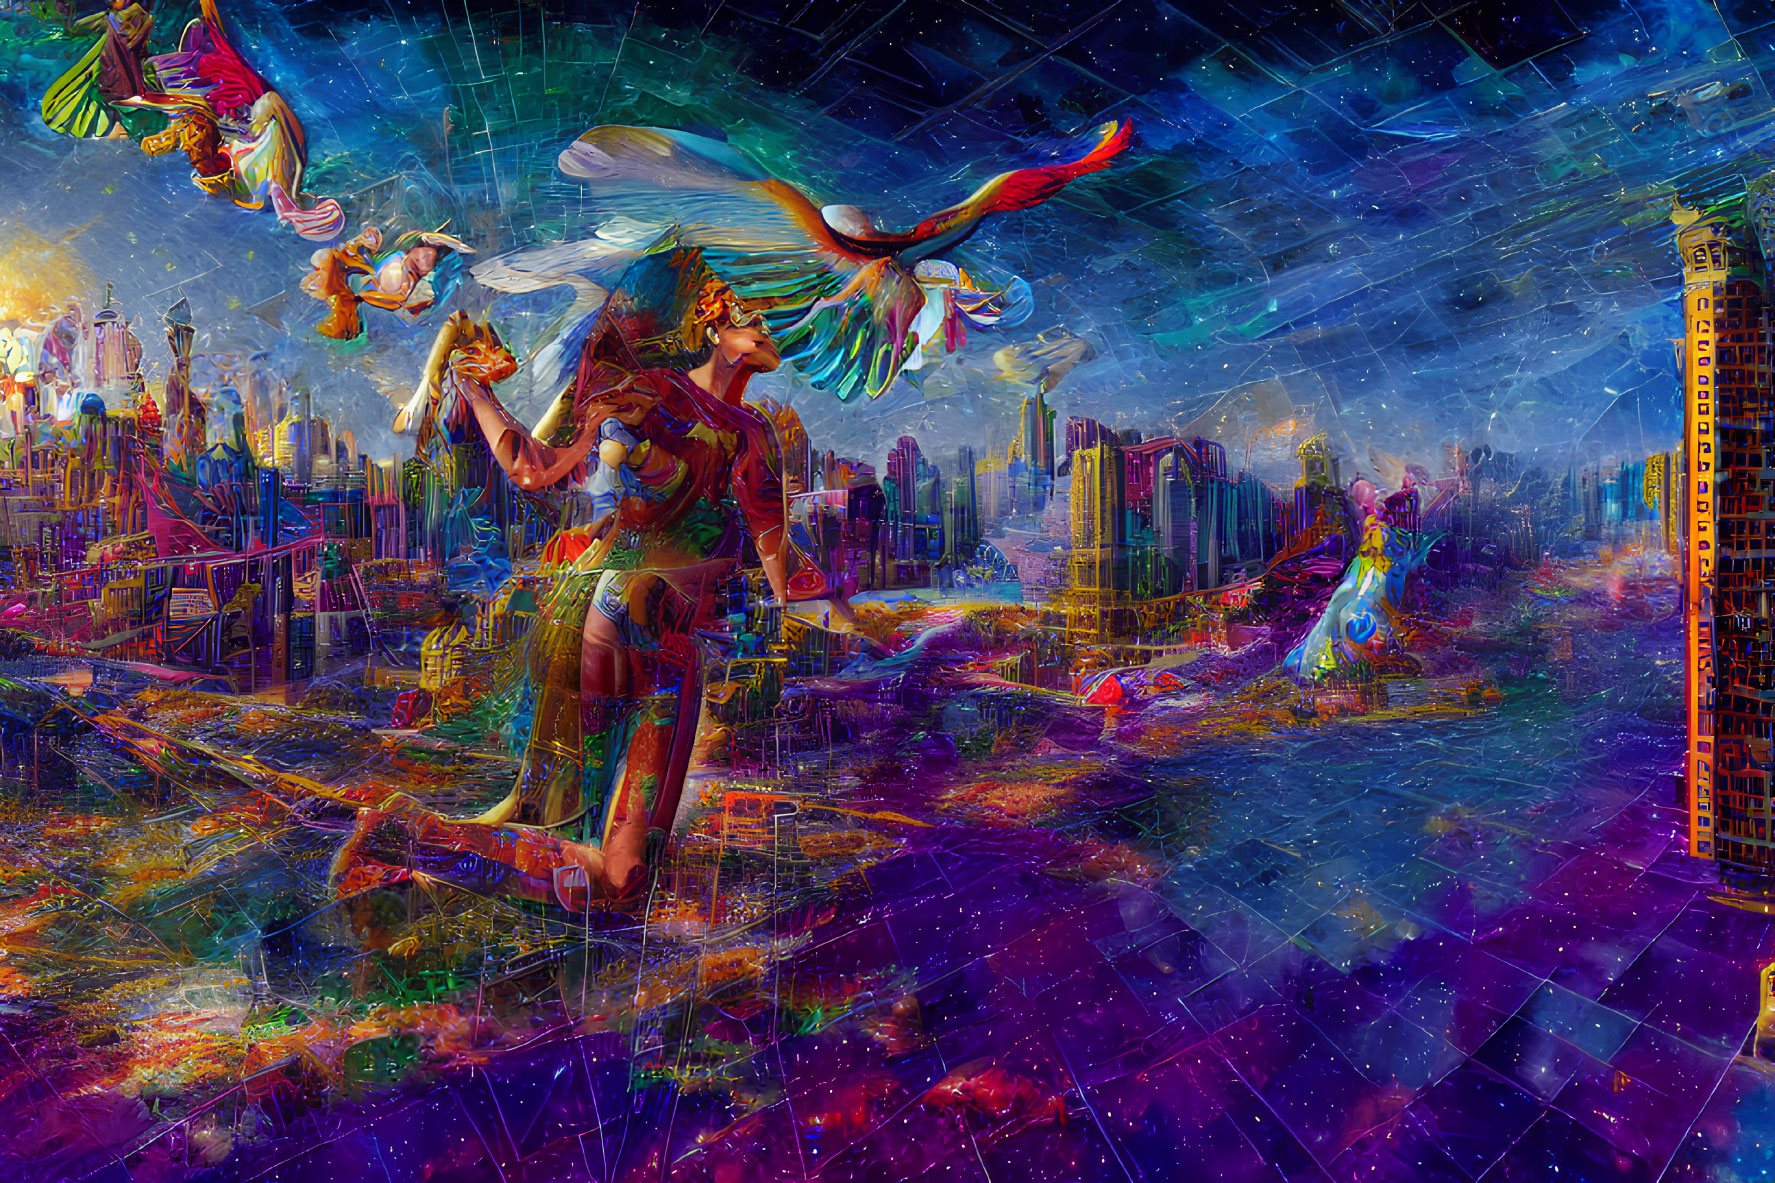 Colorful Psychedelic Illustration: Warrior Woman with Wings in Futuristic Cityscape